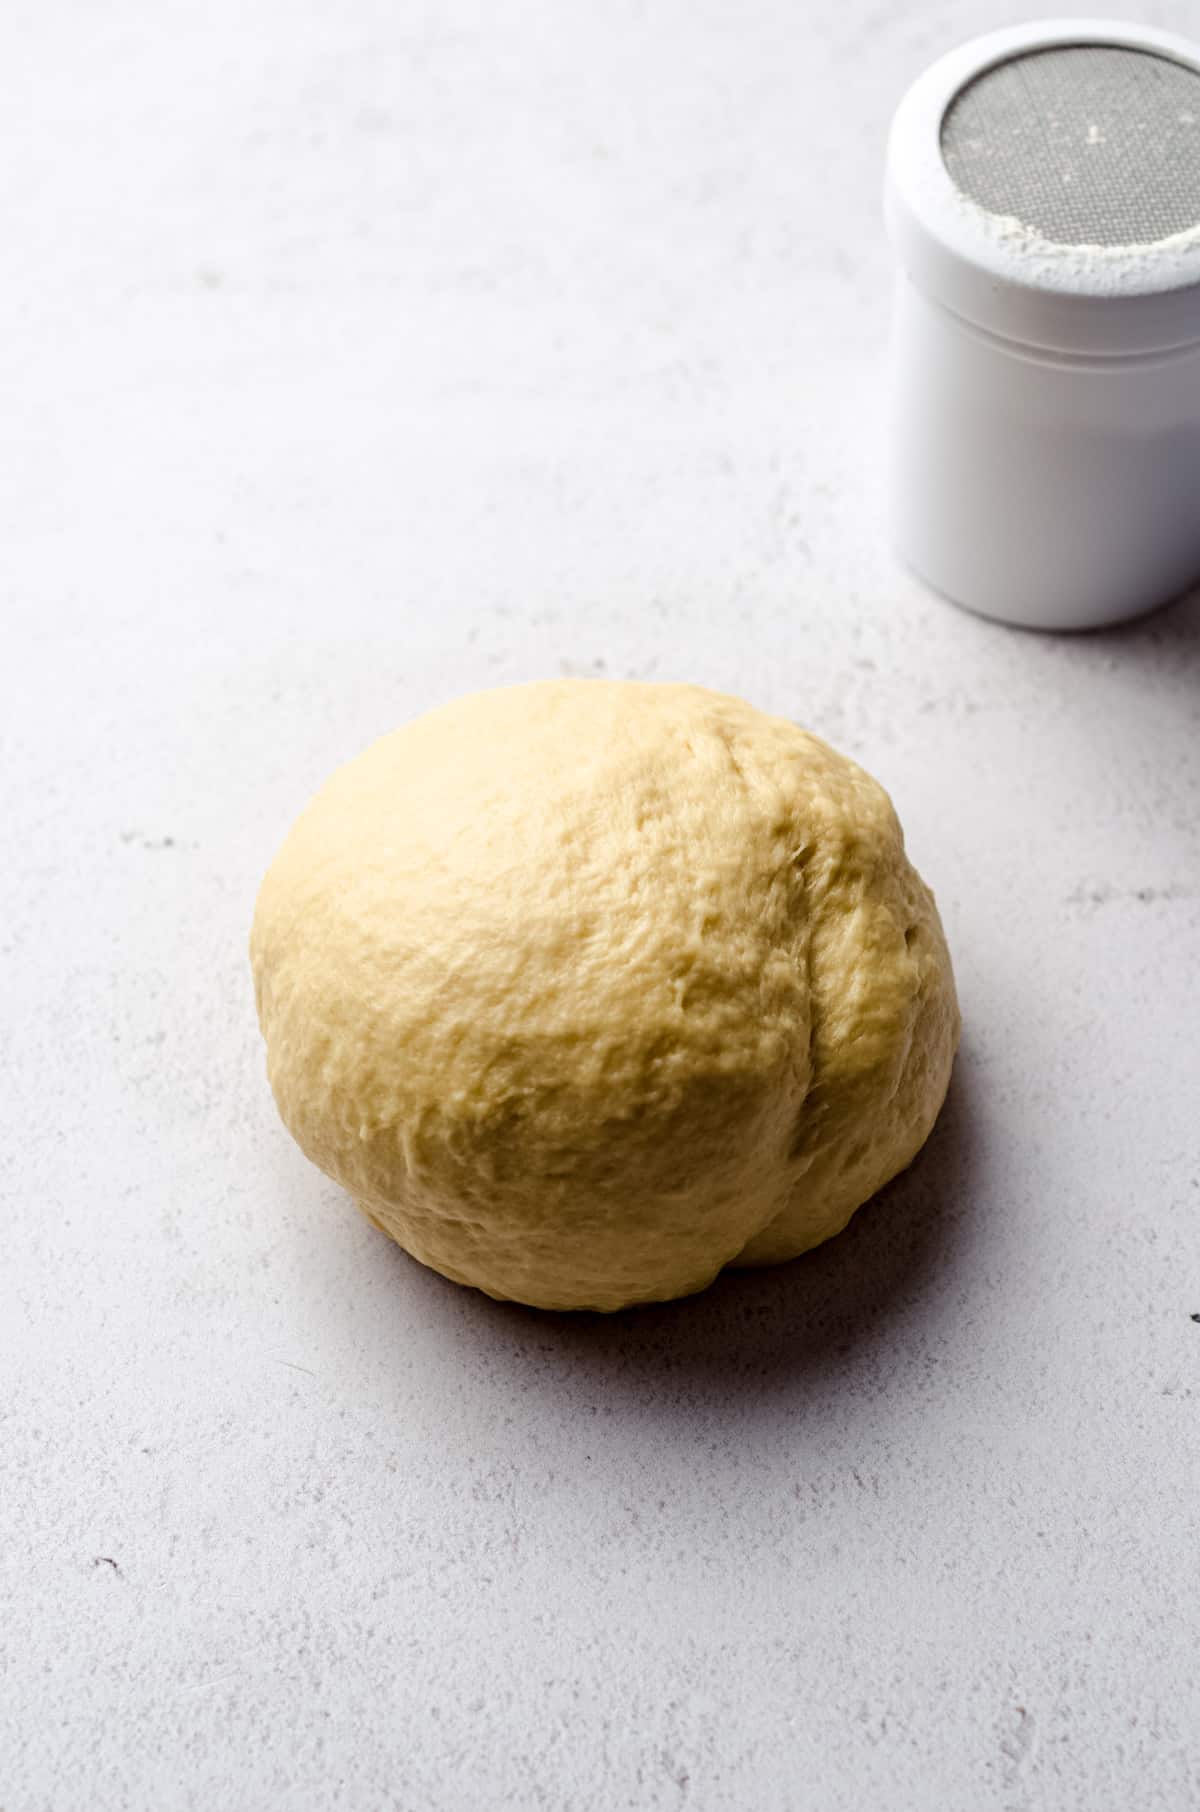 Kneaded cinnamon roll dough on a surface with a flour dredge in the background.